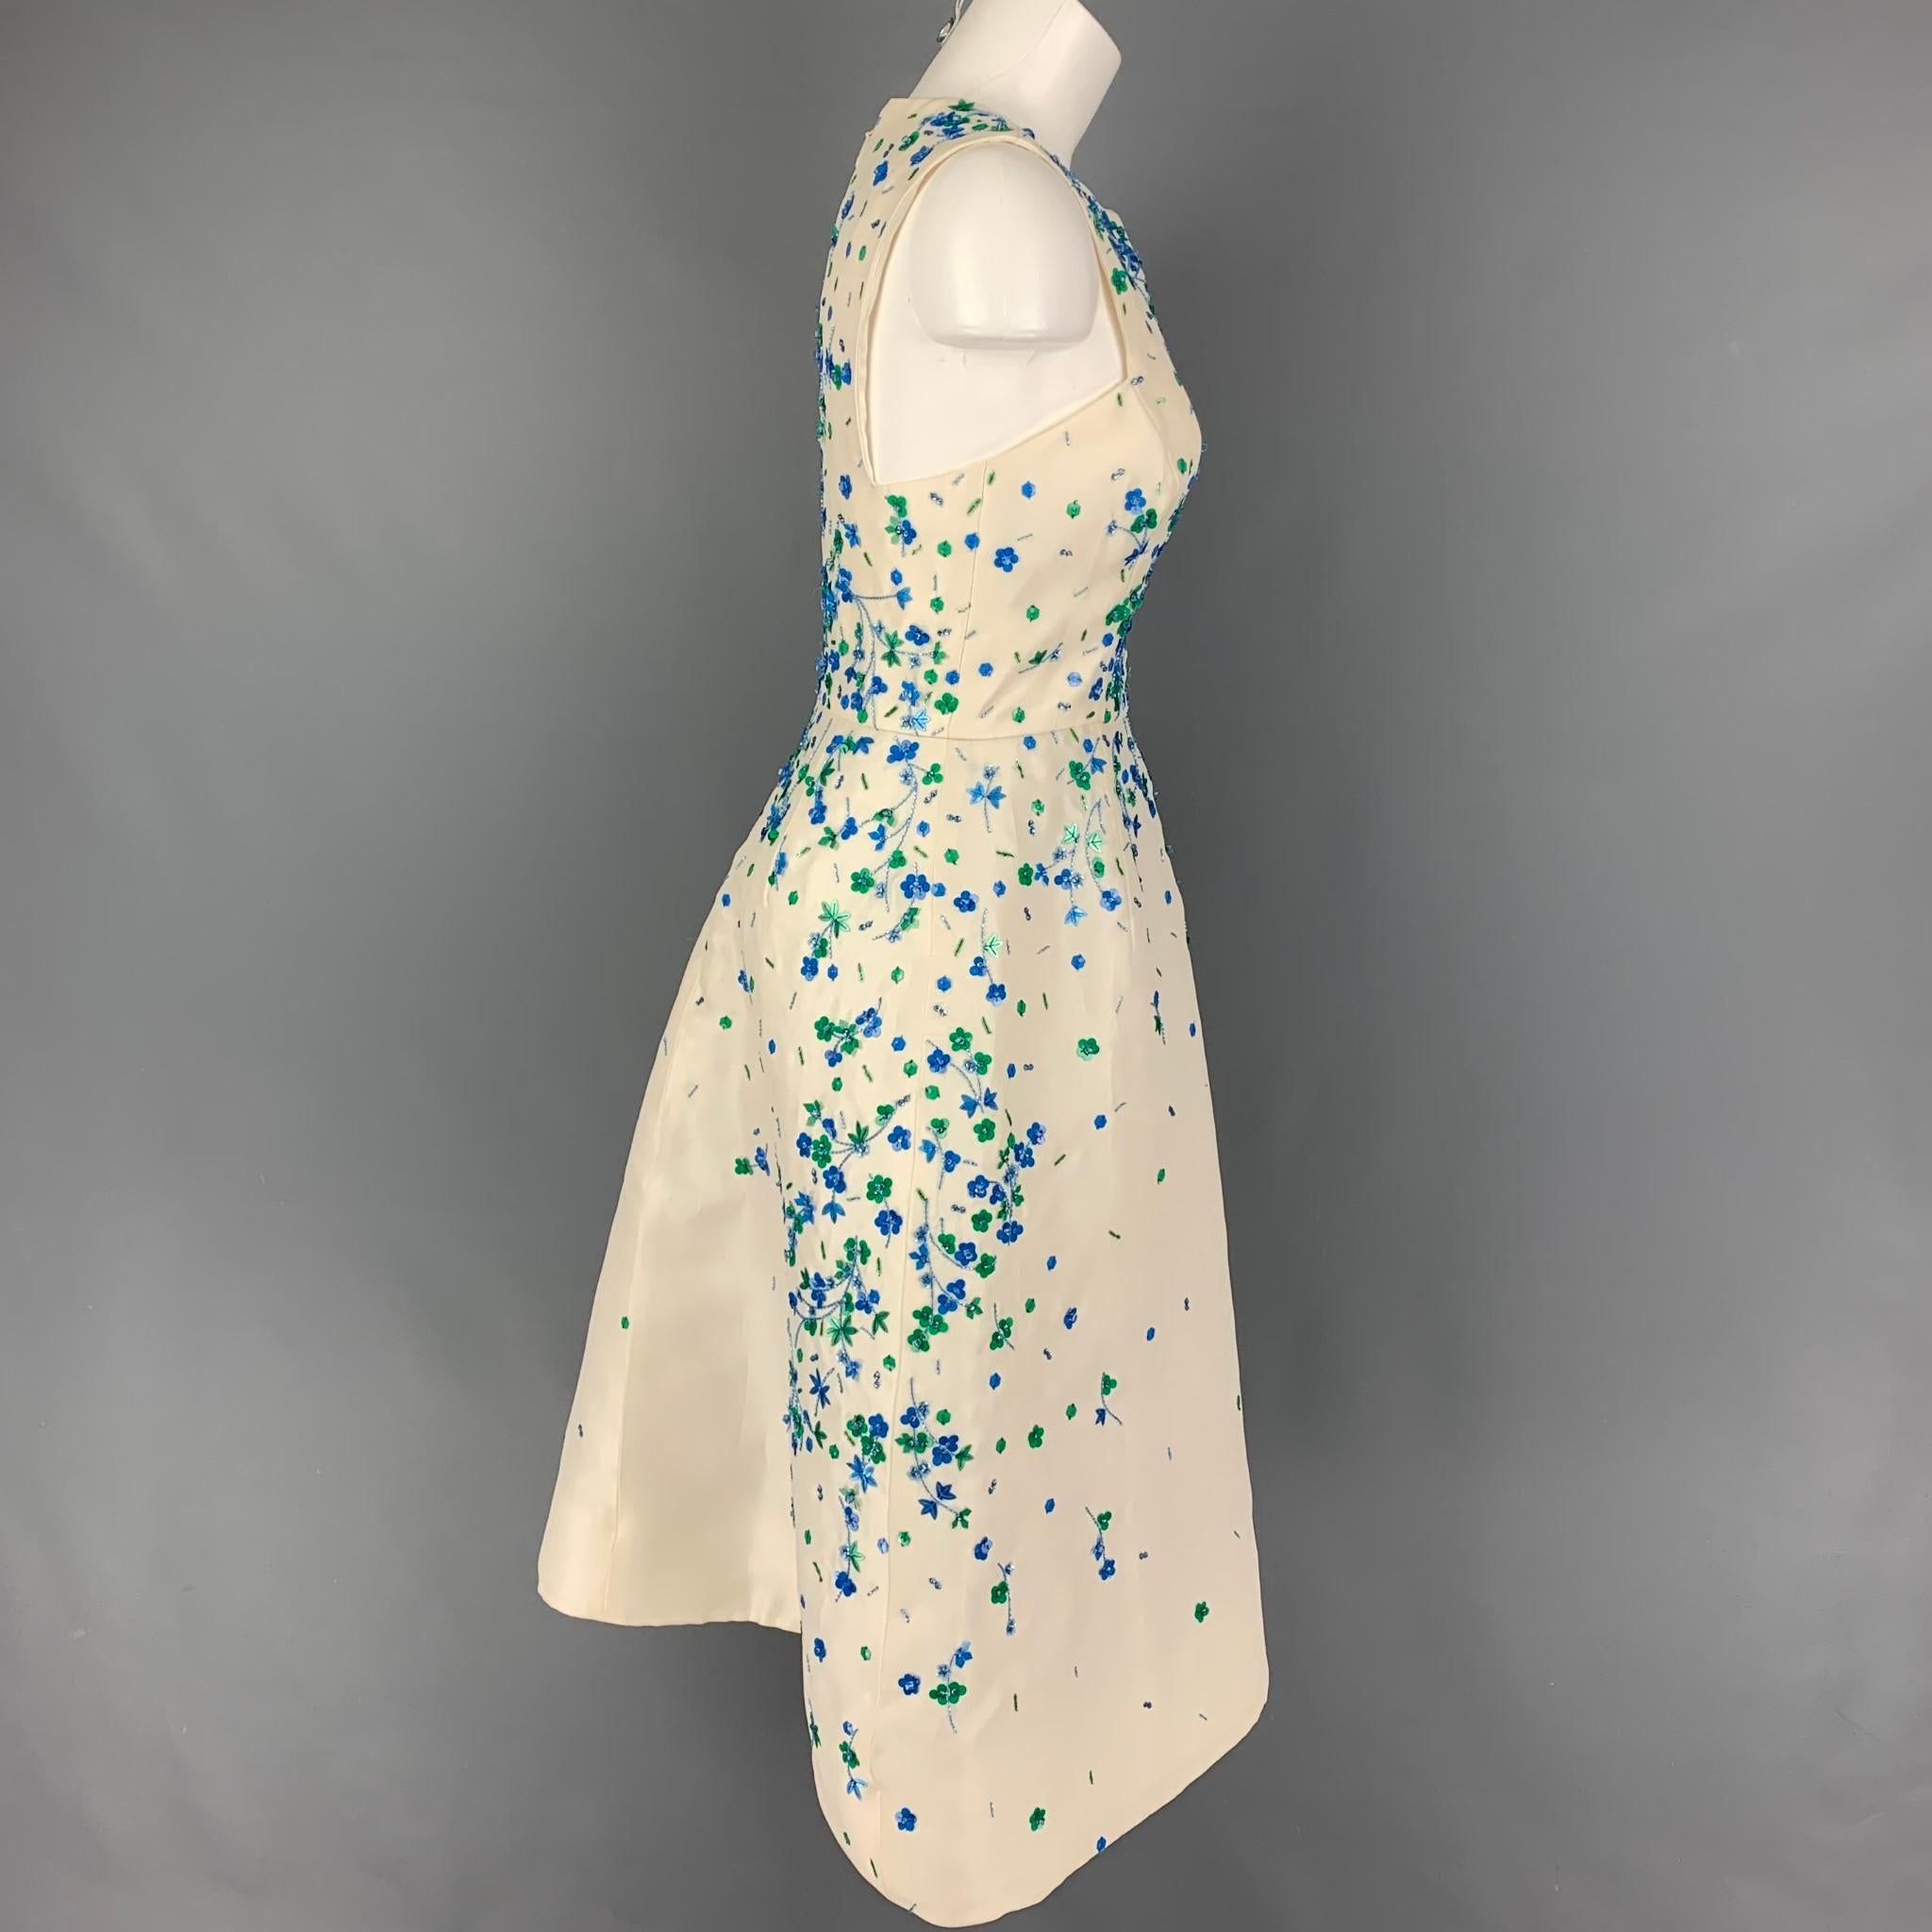 MONIQUE LHUILLIER cocktail dress comes in a cream silk with blue & green floral sequined details featuring a a-line style, sleeveless, ad a back zip up closure. Made in USA. 

Very Good Pre-Owned Condition.
Marked: 6

Measurements:

Shoulder: 12.75